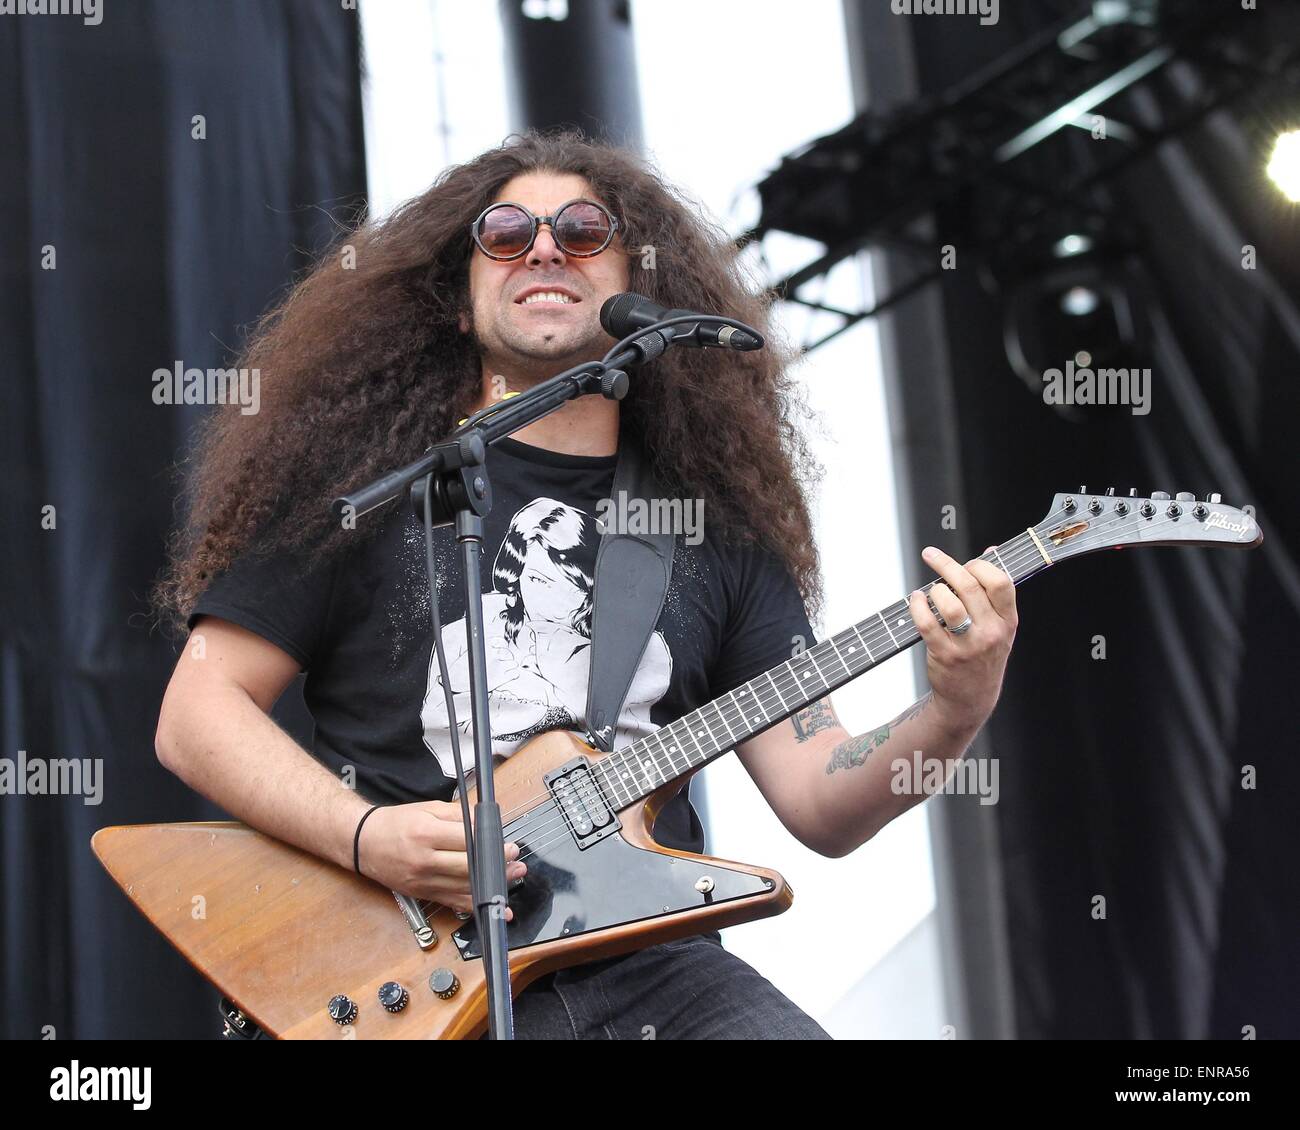 Las Vegas, NV, USA. 9th May, 2015. Claudio Sanchez of Coheed and Cambria on stage for Rock in Rio USA 2015 - SAT, City of Rock, Las Vegas, NV May 9, 2015. Credit:  James Atoa/Everett Collection/Alamy Live News Stock Photo